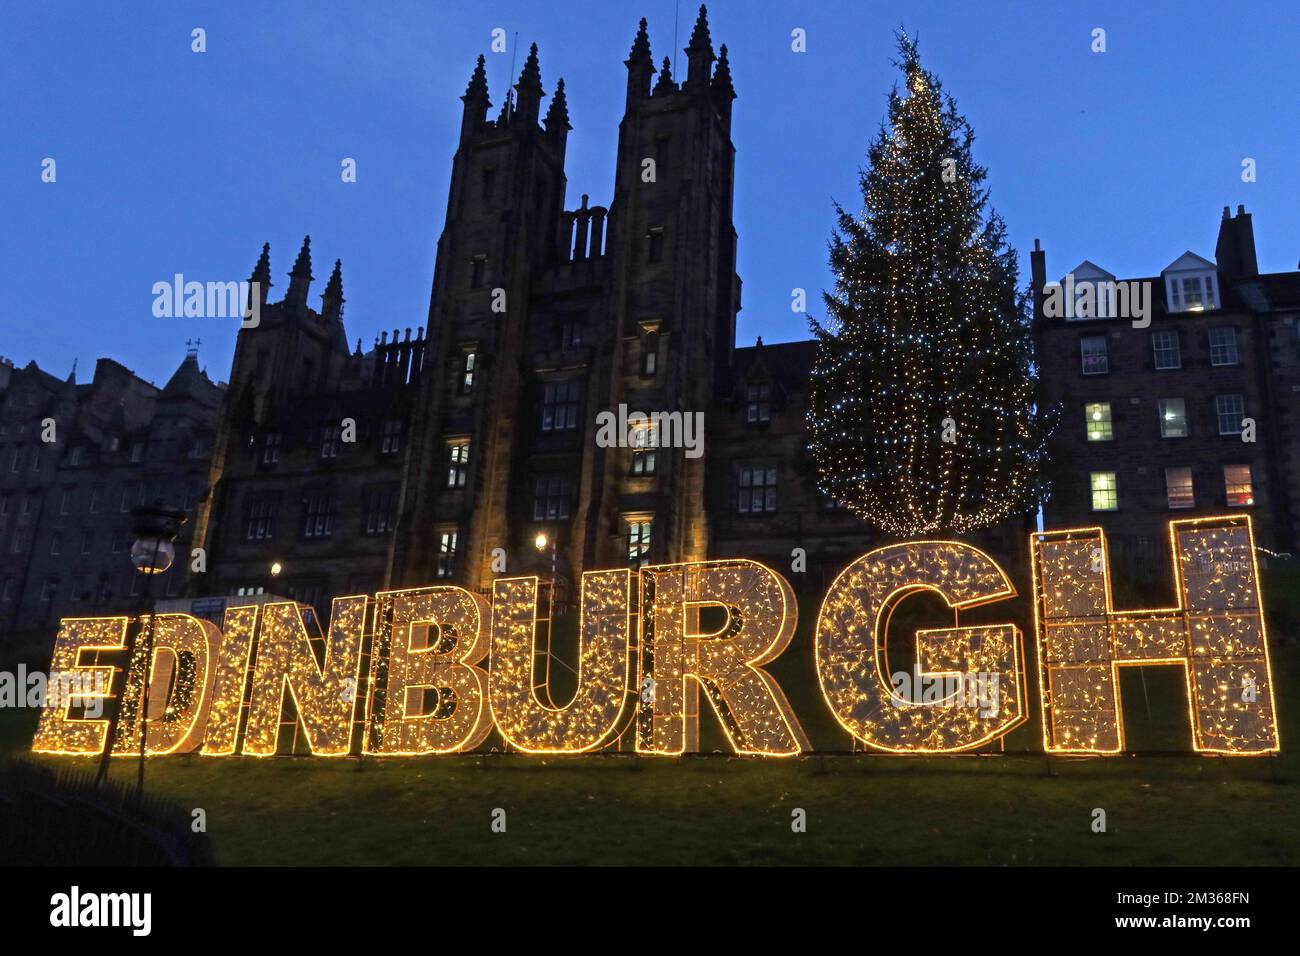 The Mound at Christmas and Hogmanay, Old Town, Edinburgh in Lights, capitale de l'Écosse, Royaume-Uni - Epelé en lettres Banque D'Images